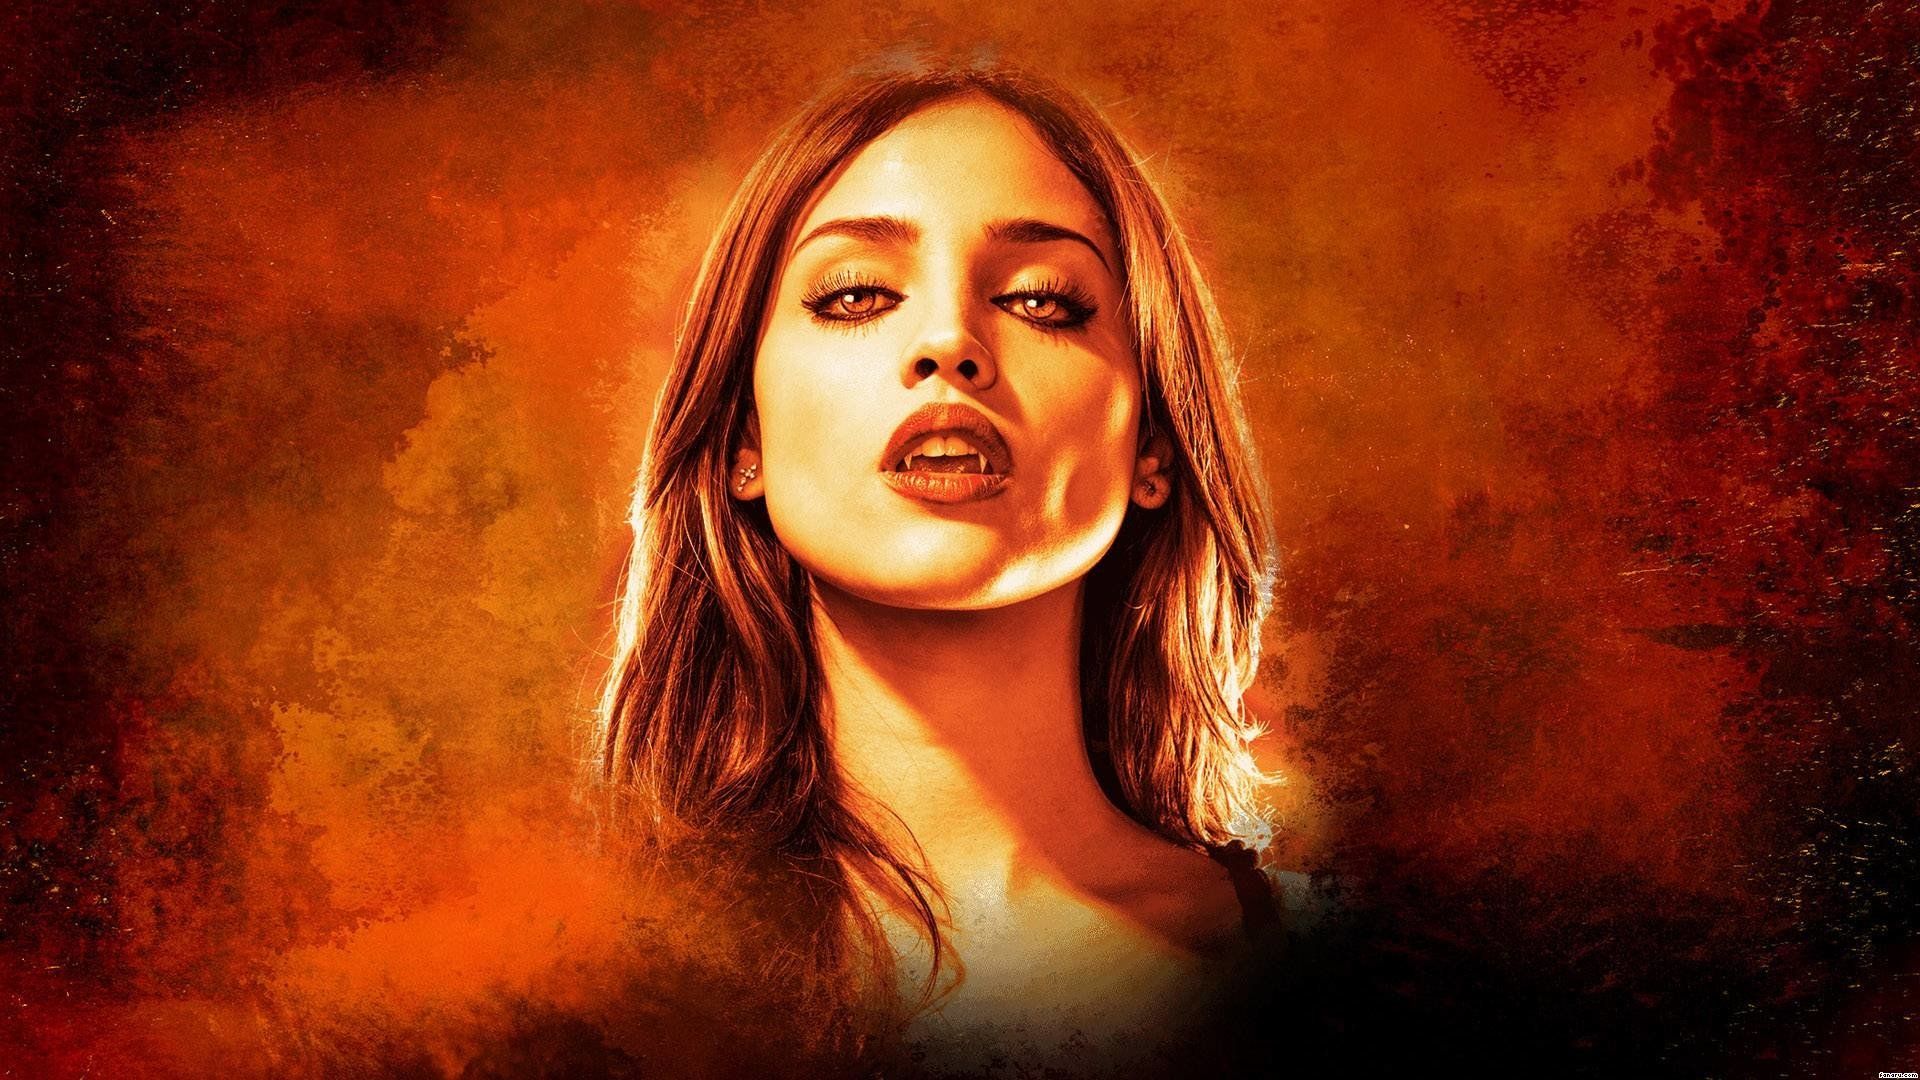 From Dusk Till Dawn: The Series HD Wallpaper. Background